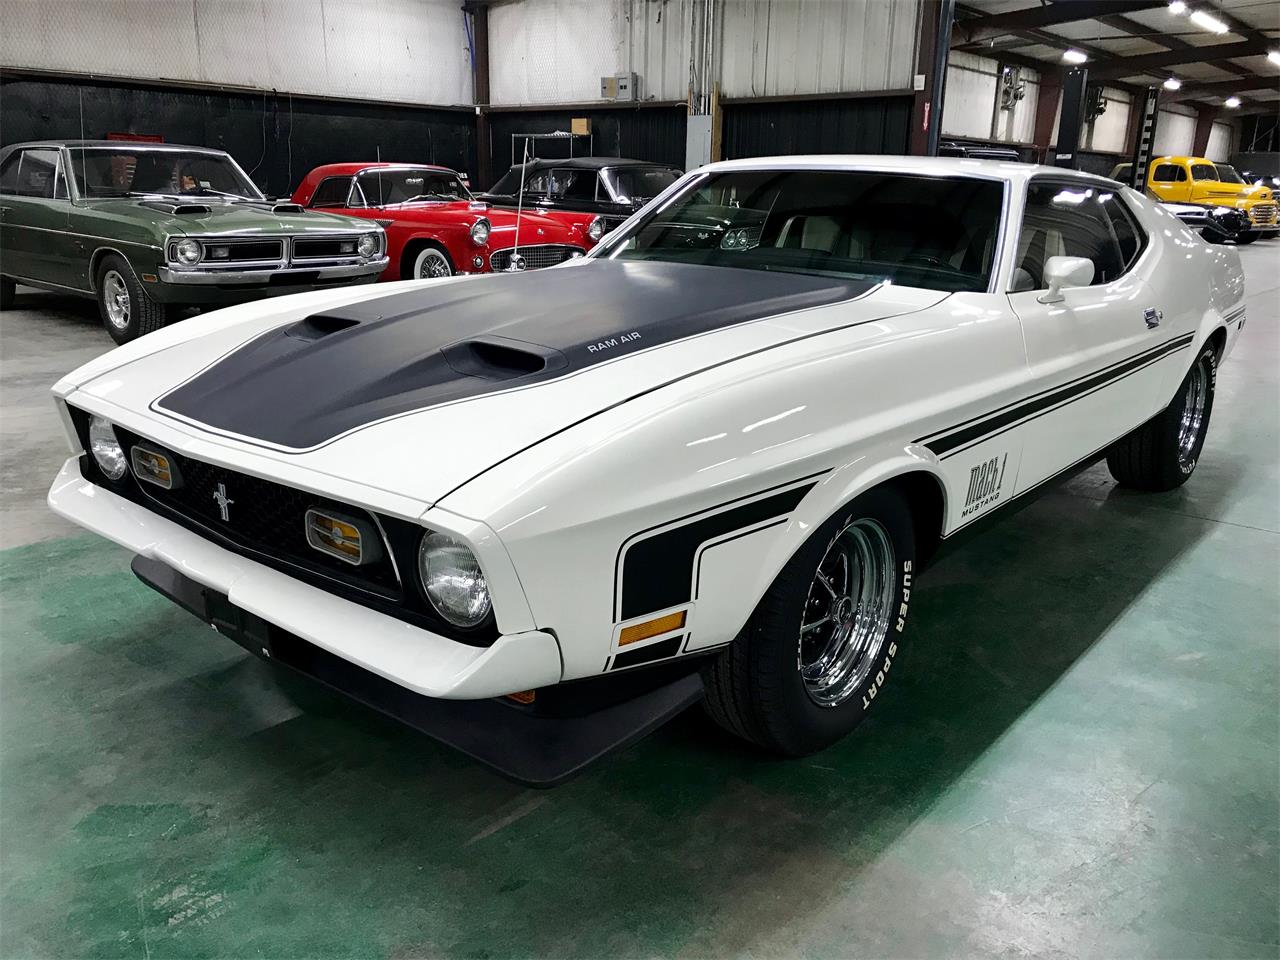 1972 Ford Mustang Mach 1 For Sale | Classiccars.Com | Cc-1206102